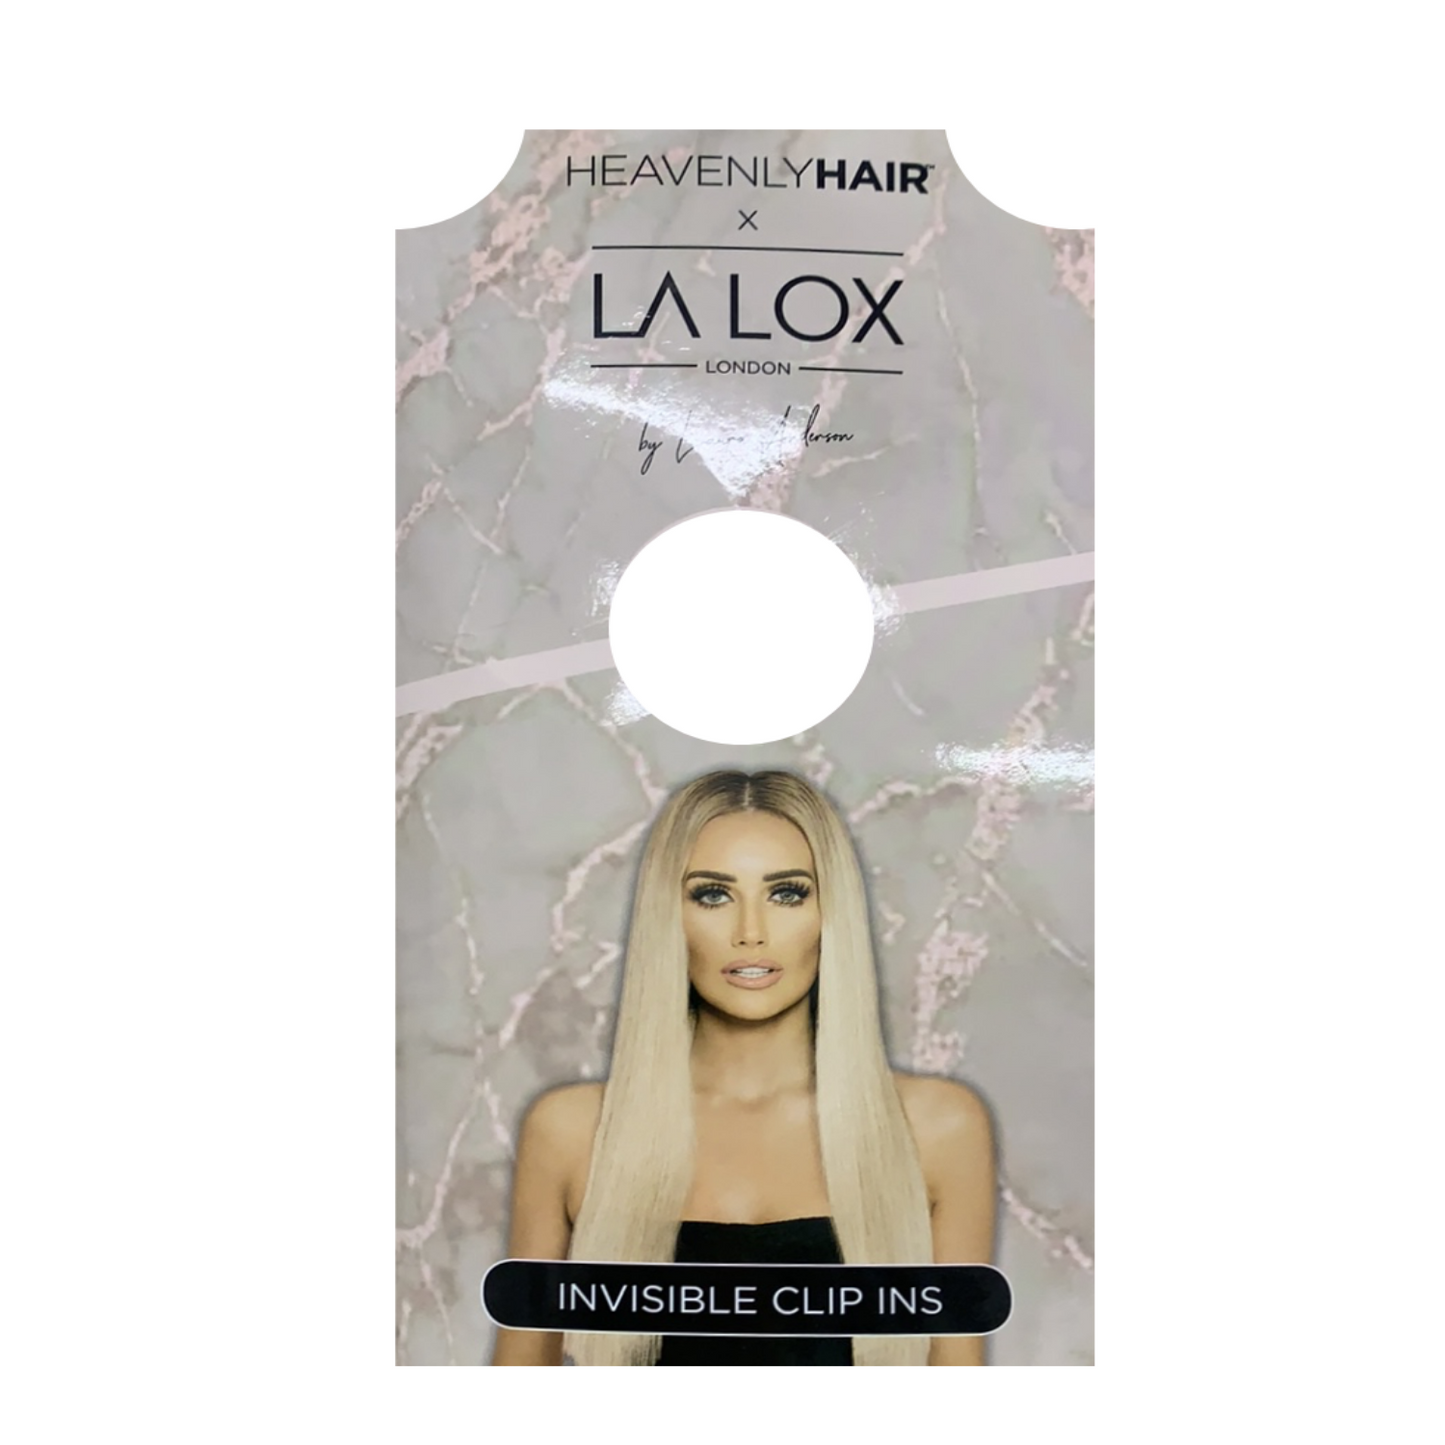 Heavenly Hair LA LOX Invisible Clip In Hair Extensions - Platinum Nights (SHOP)